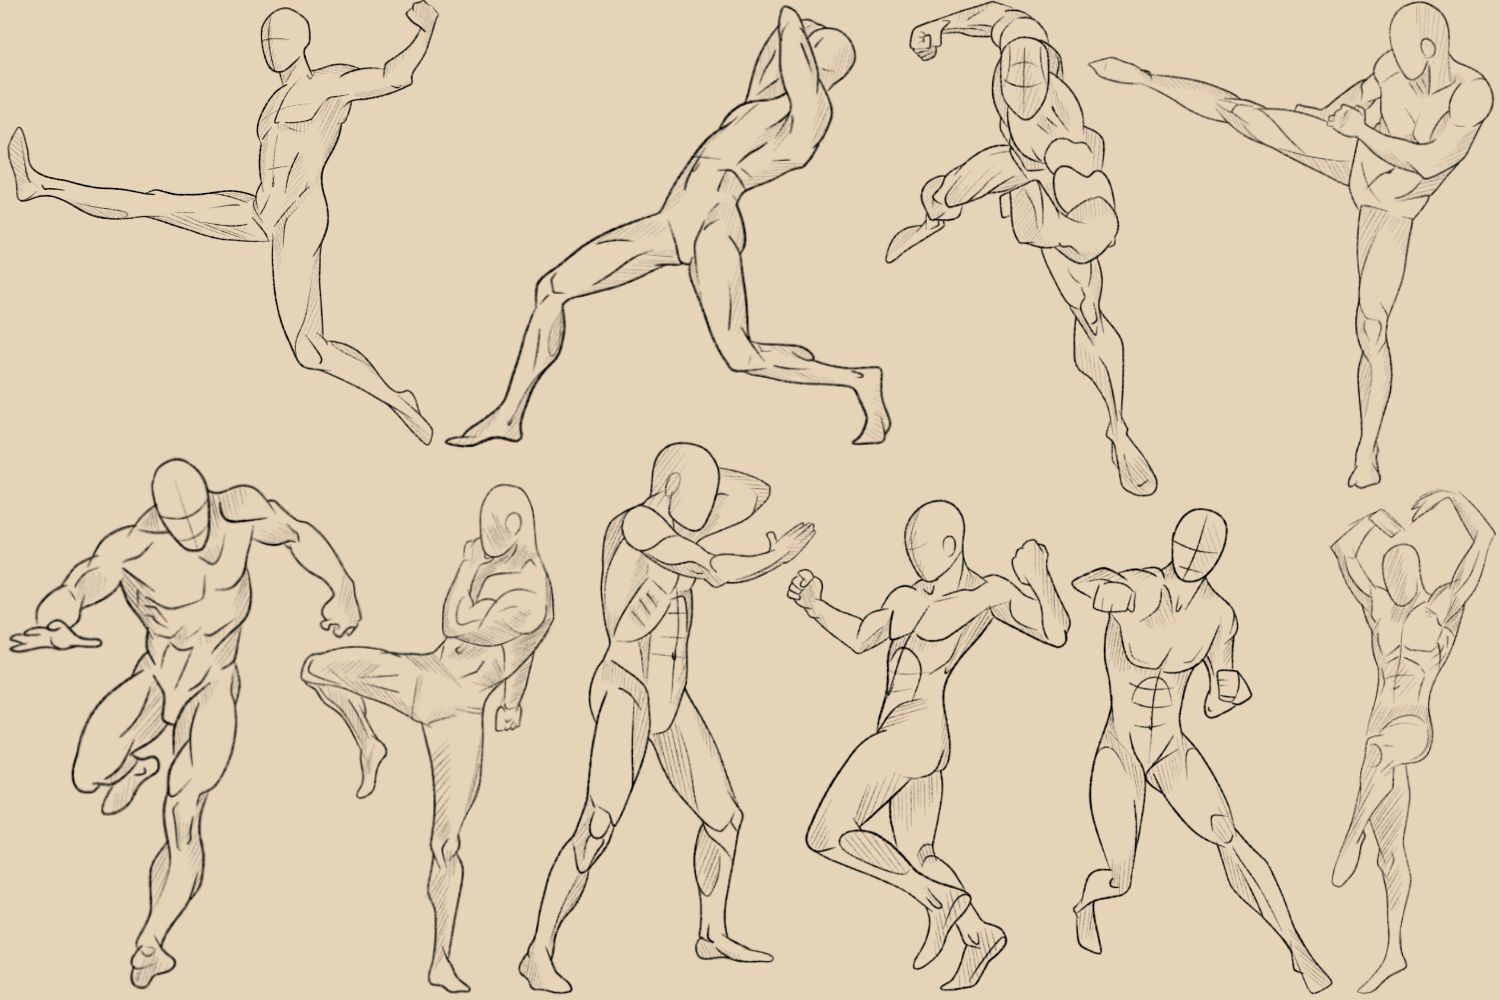 Cubebrush - Action poses by Emilio Alcala. Support the artist  https://buff.ly/3NgpFmX | Facebook